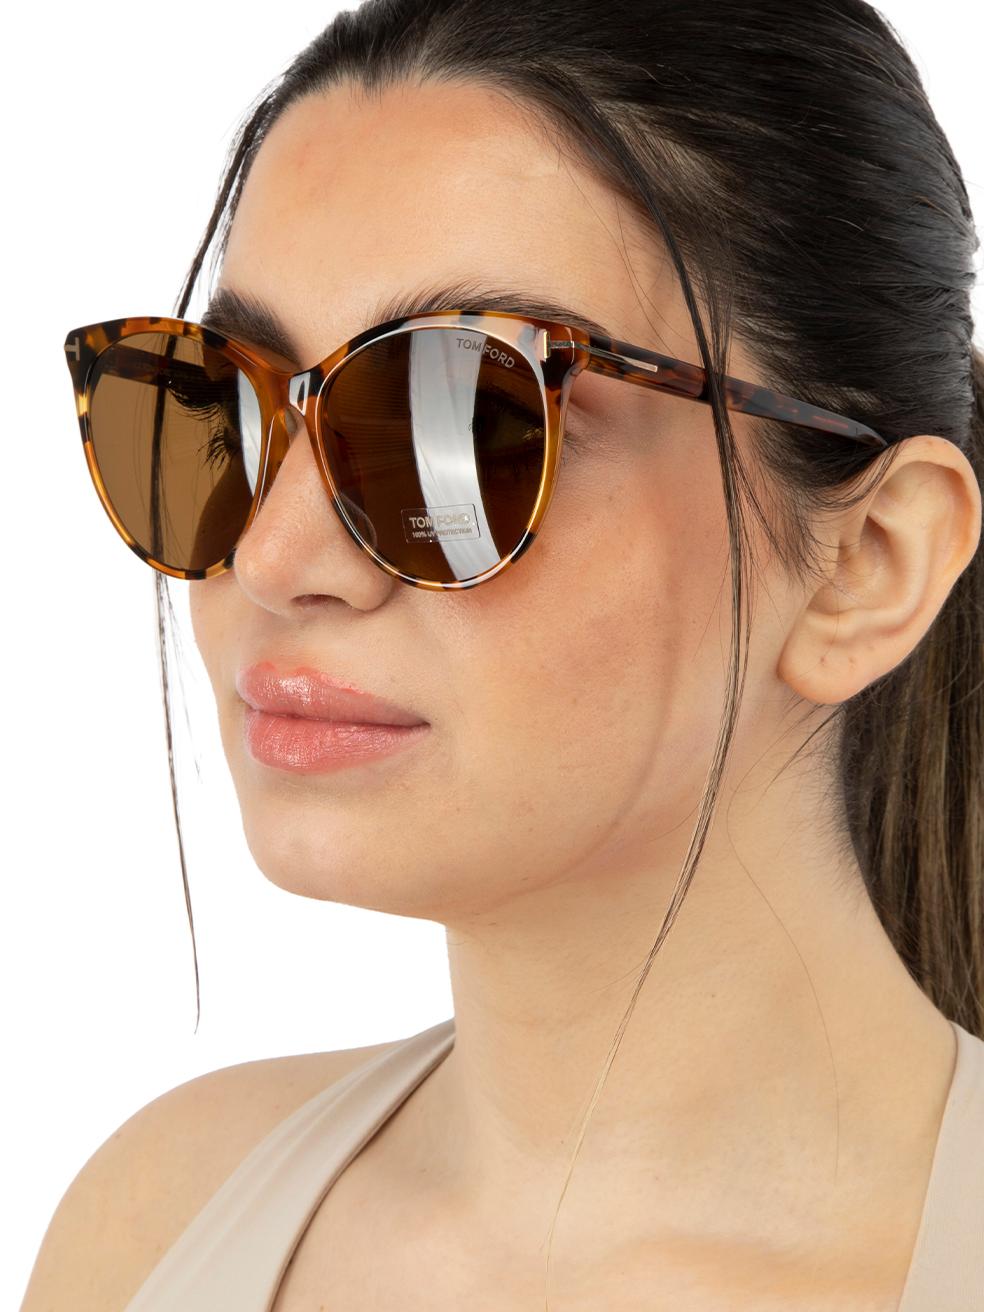 CONDITION is New with tags on this brand new Tom Ford designer item. This item comes with original packaging.
 
 
 
 Details
 
 
 Model: FT0787
 
 Coloured Havana
 
 Acetate
 
 Round Sunglasses
 
 Brown Lens
 
 Full-Rim
 
 Tortoiseshell Frames
 
 
